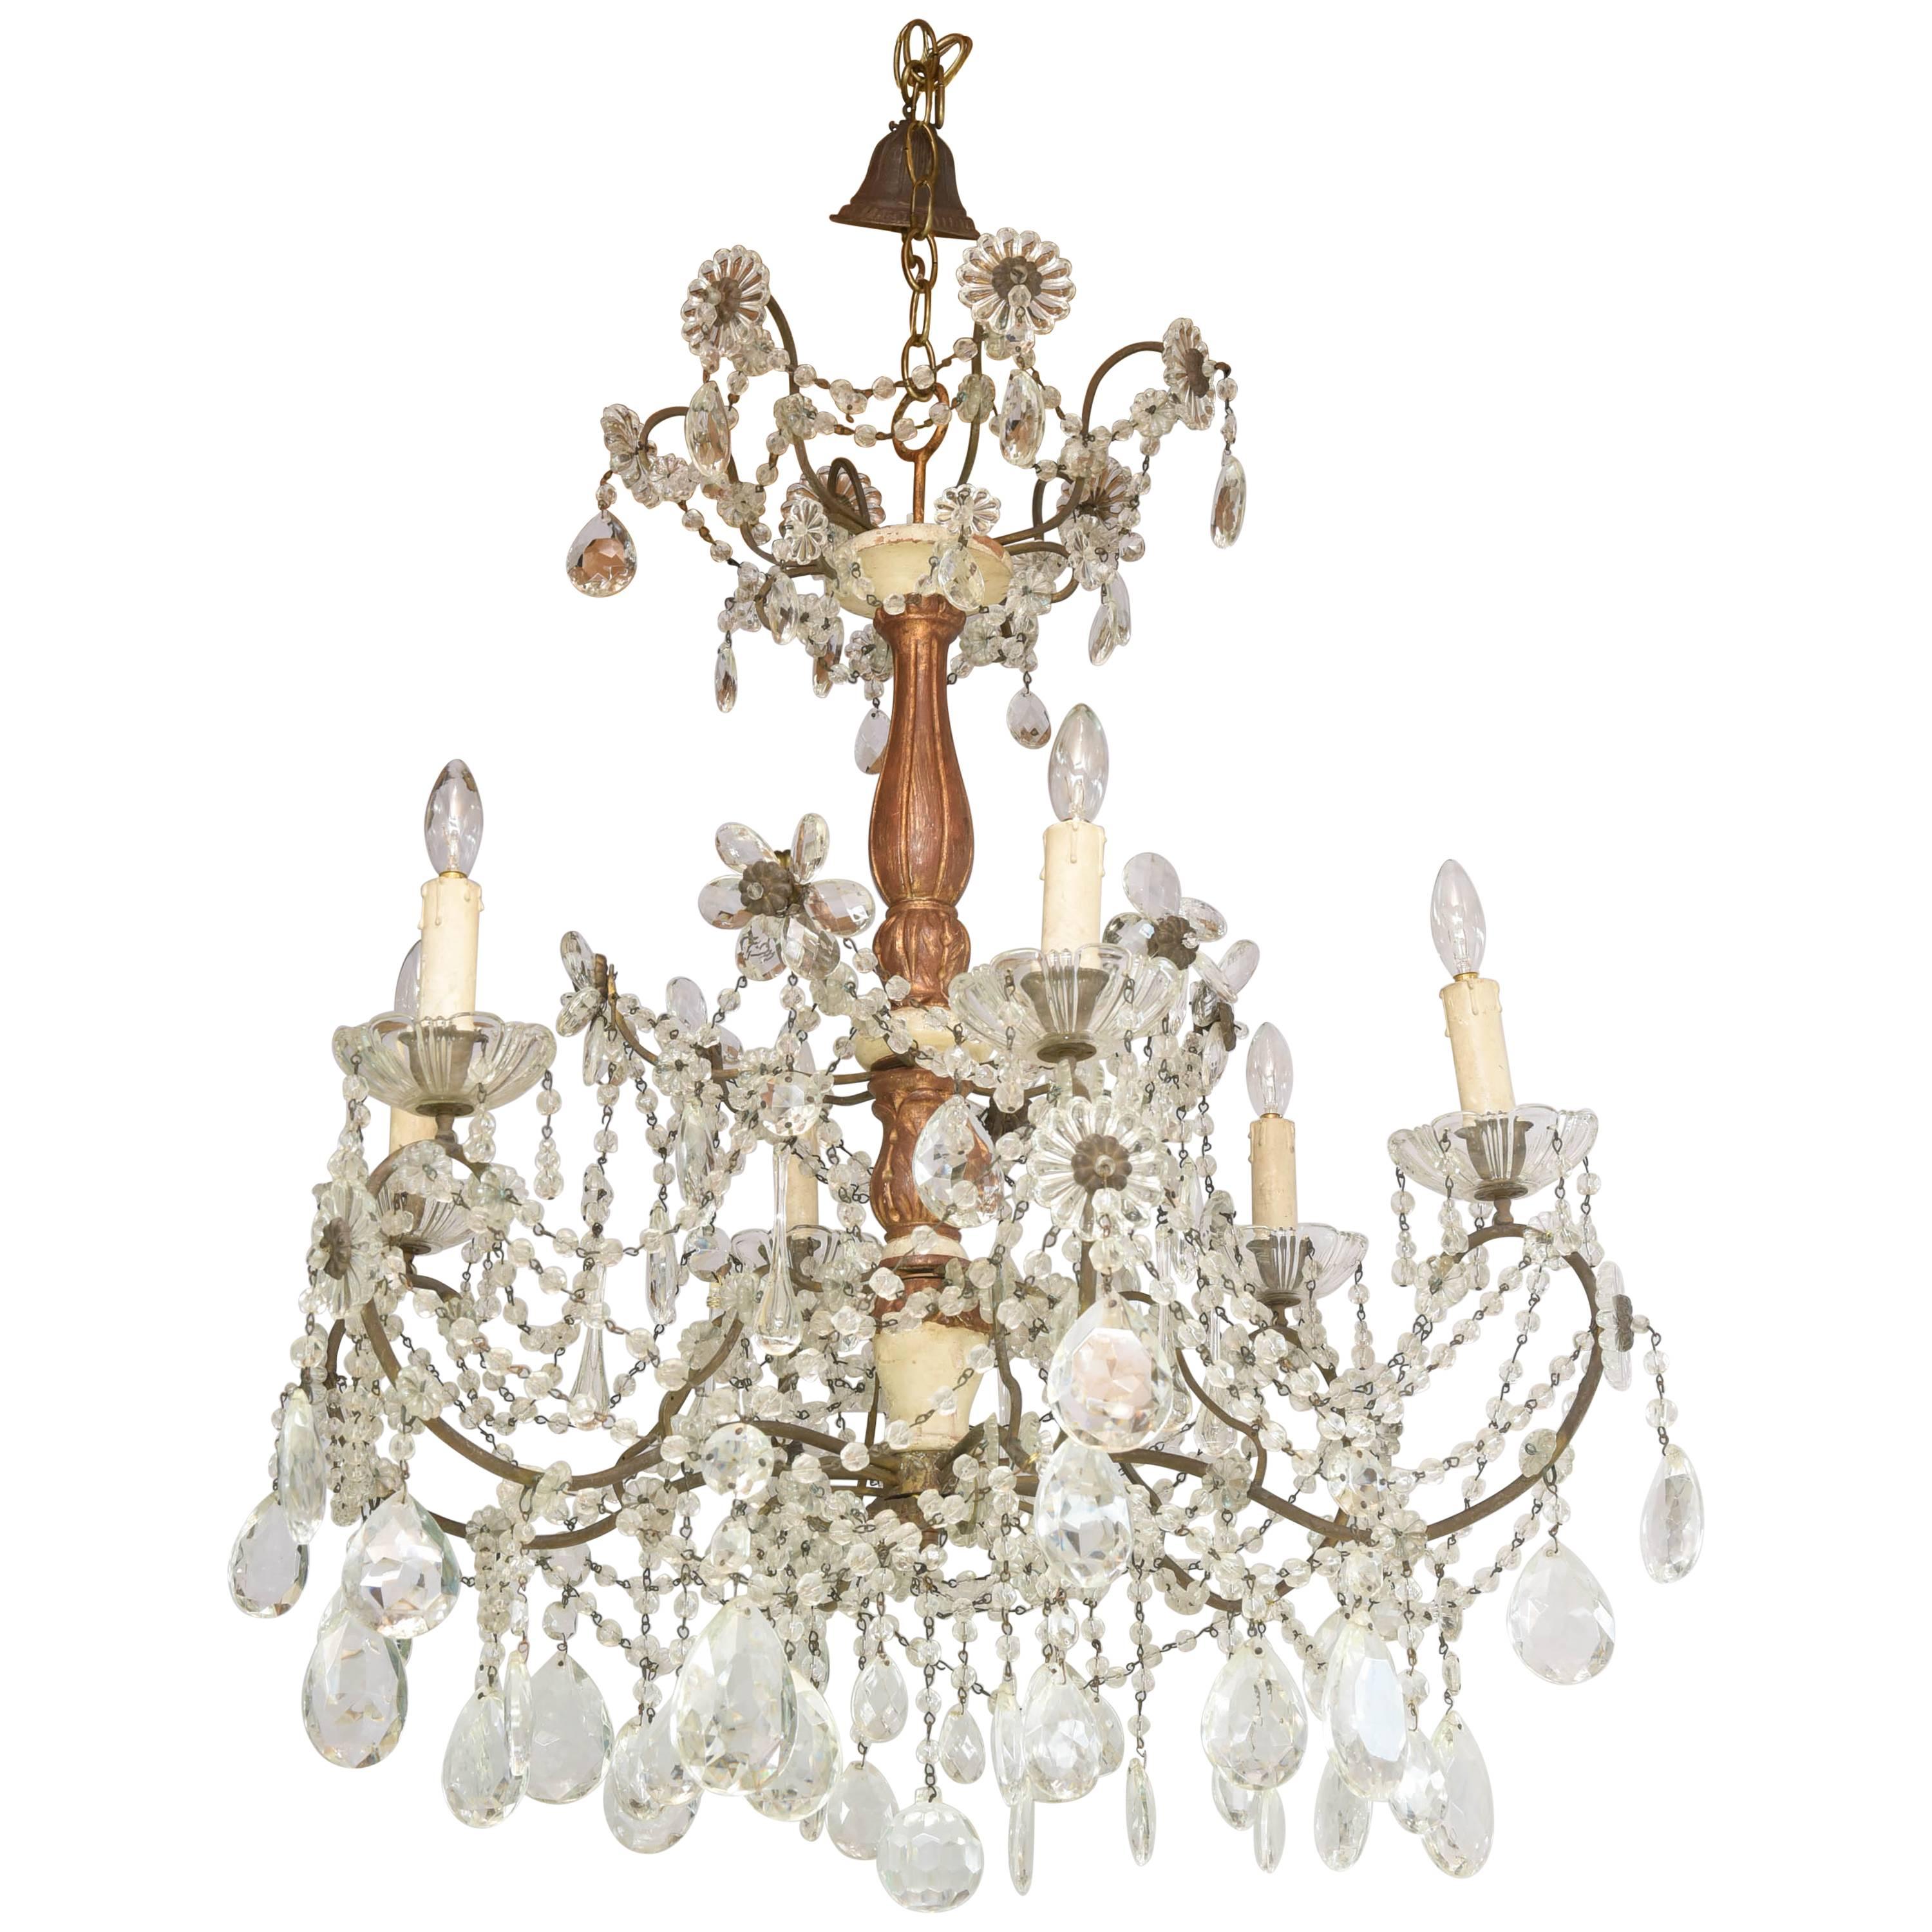 19th Century Italian Pricket Chandelier Draped in Crystal Beads For Sale